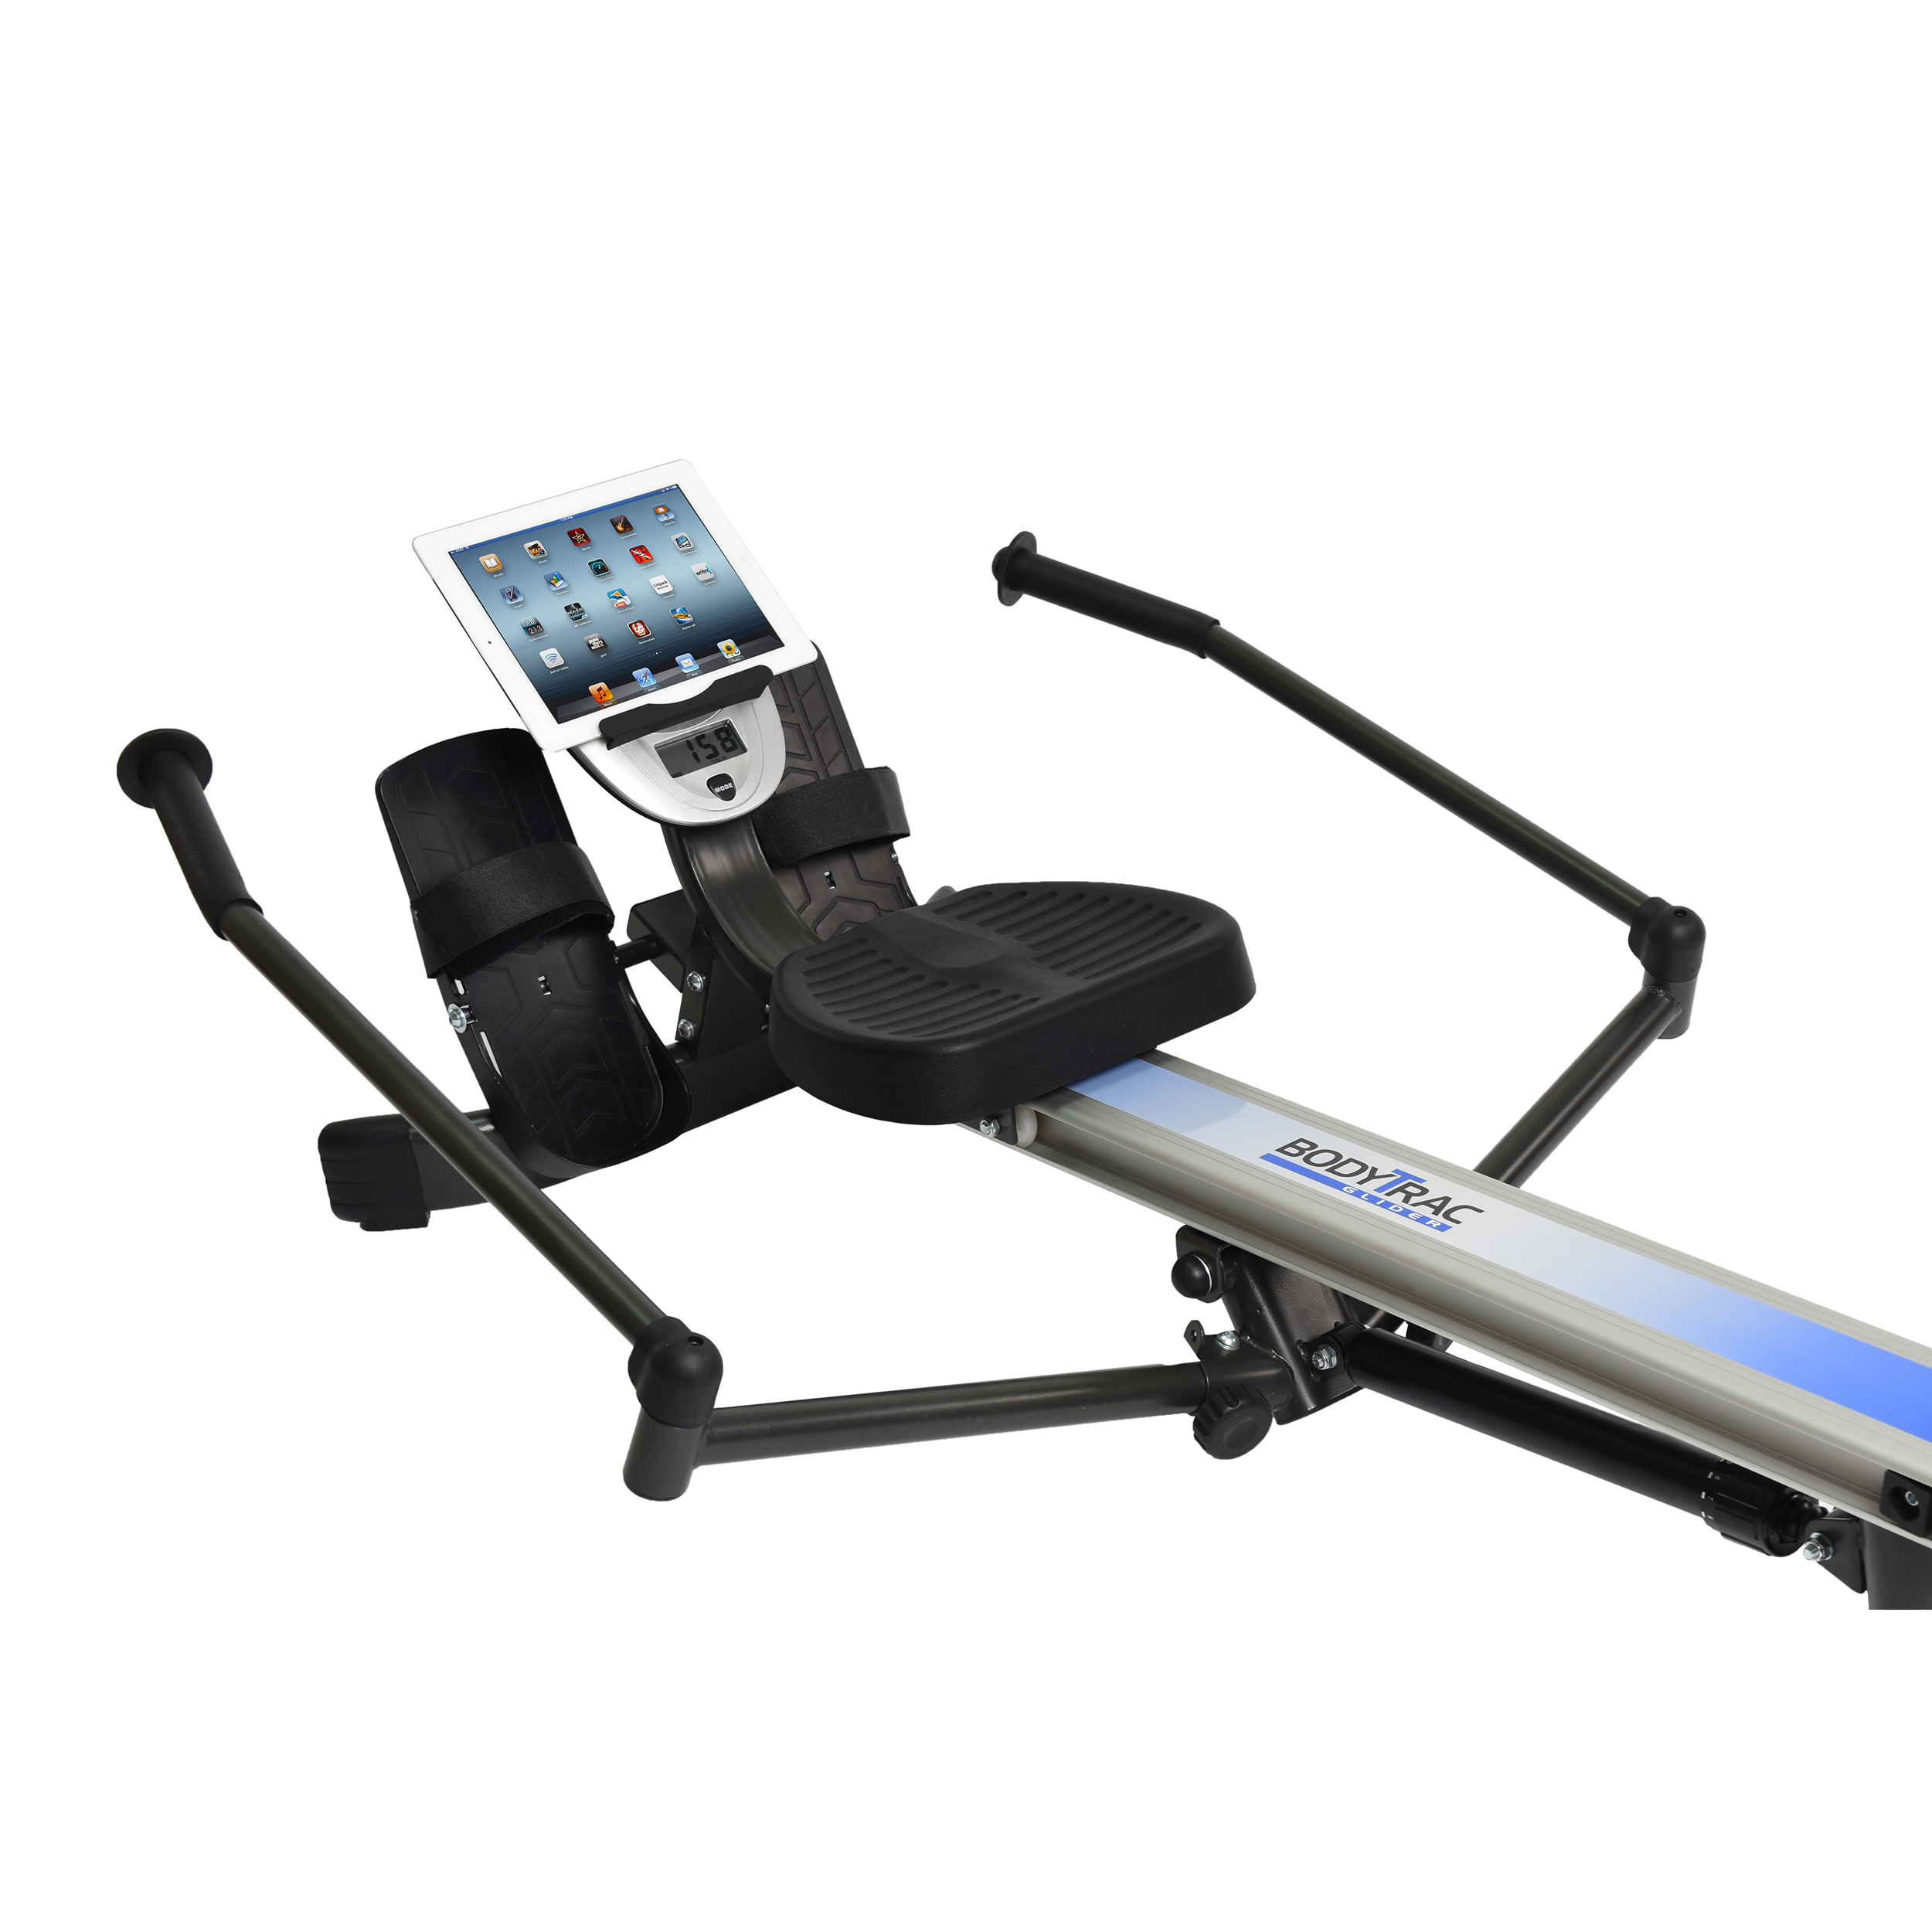 STAMINA BodyTrac® Glider ROWER EXERCISE ROWING MACHINE 35-1060 NEW 